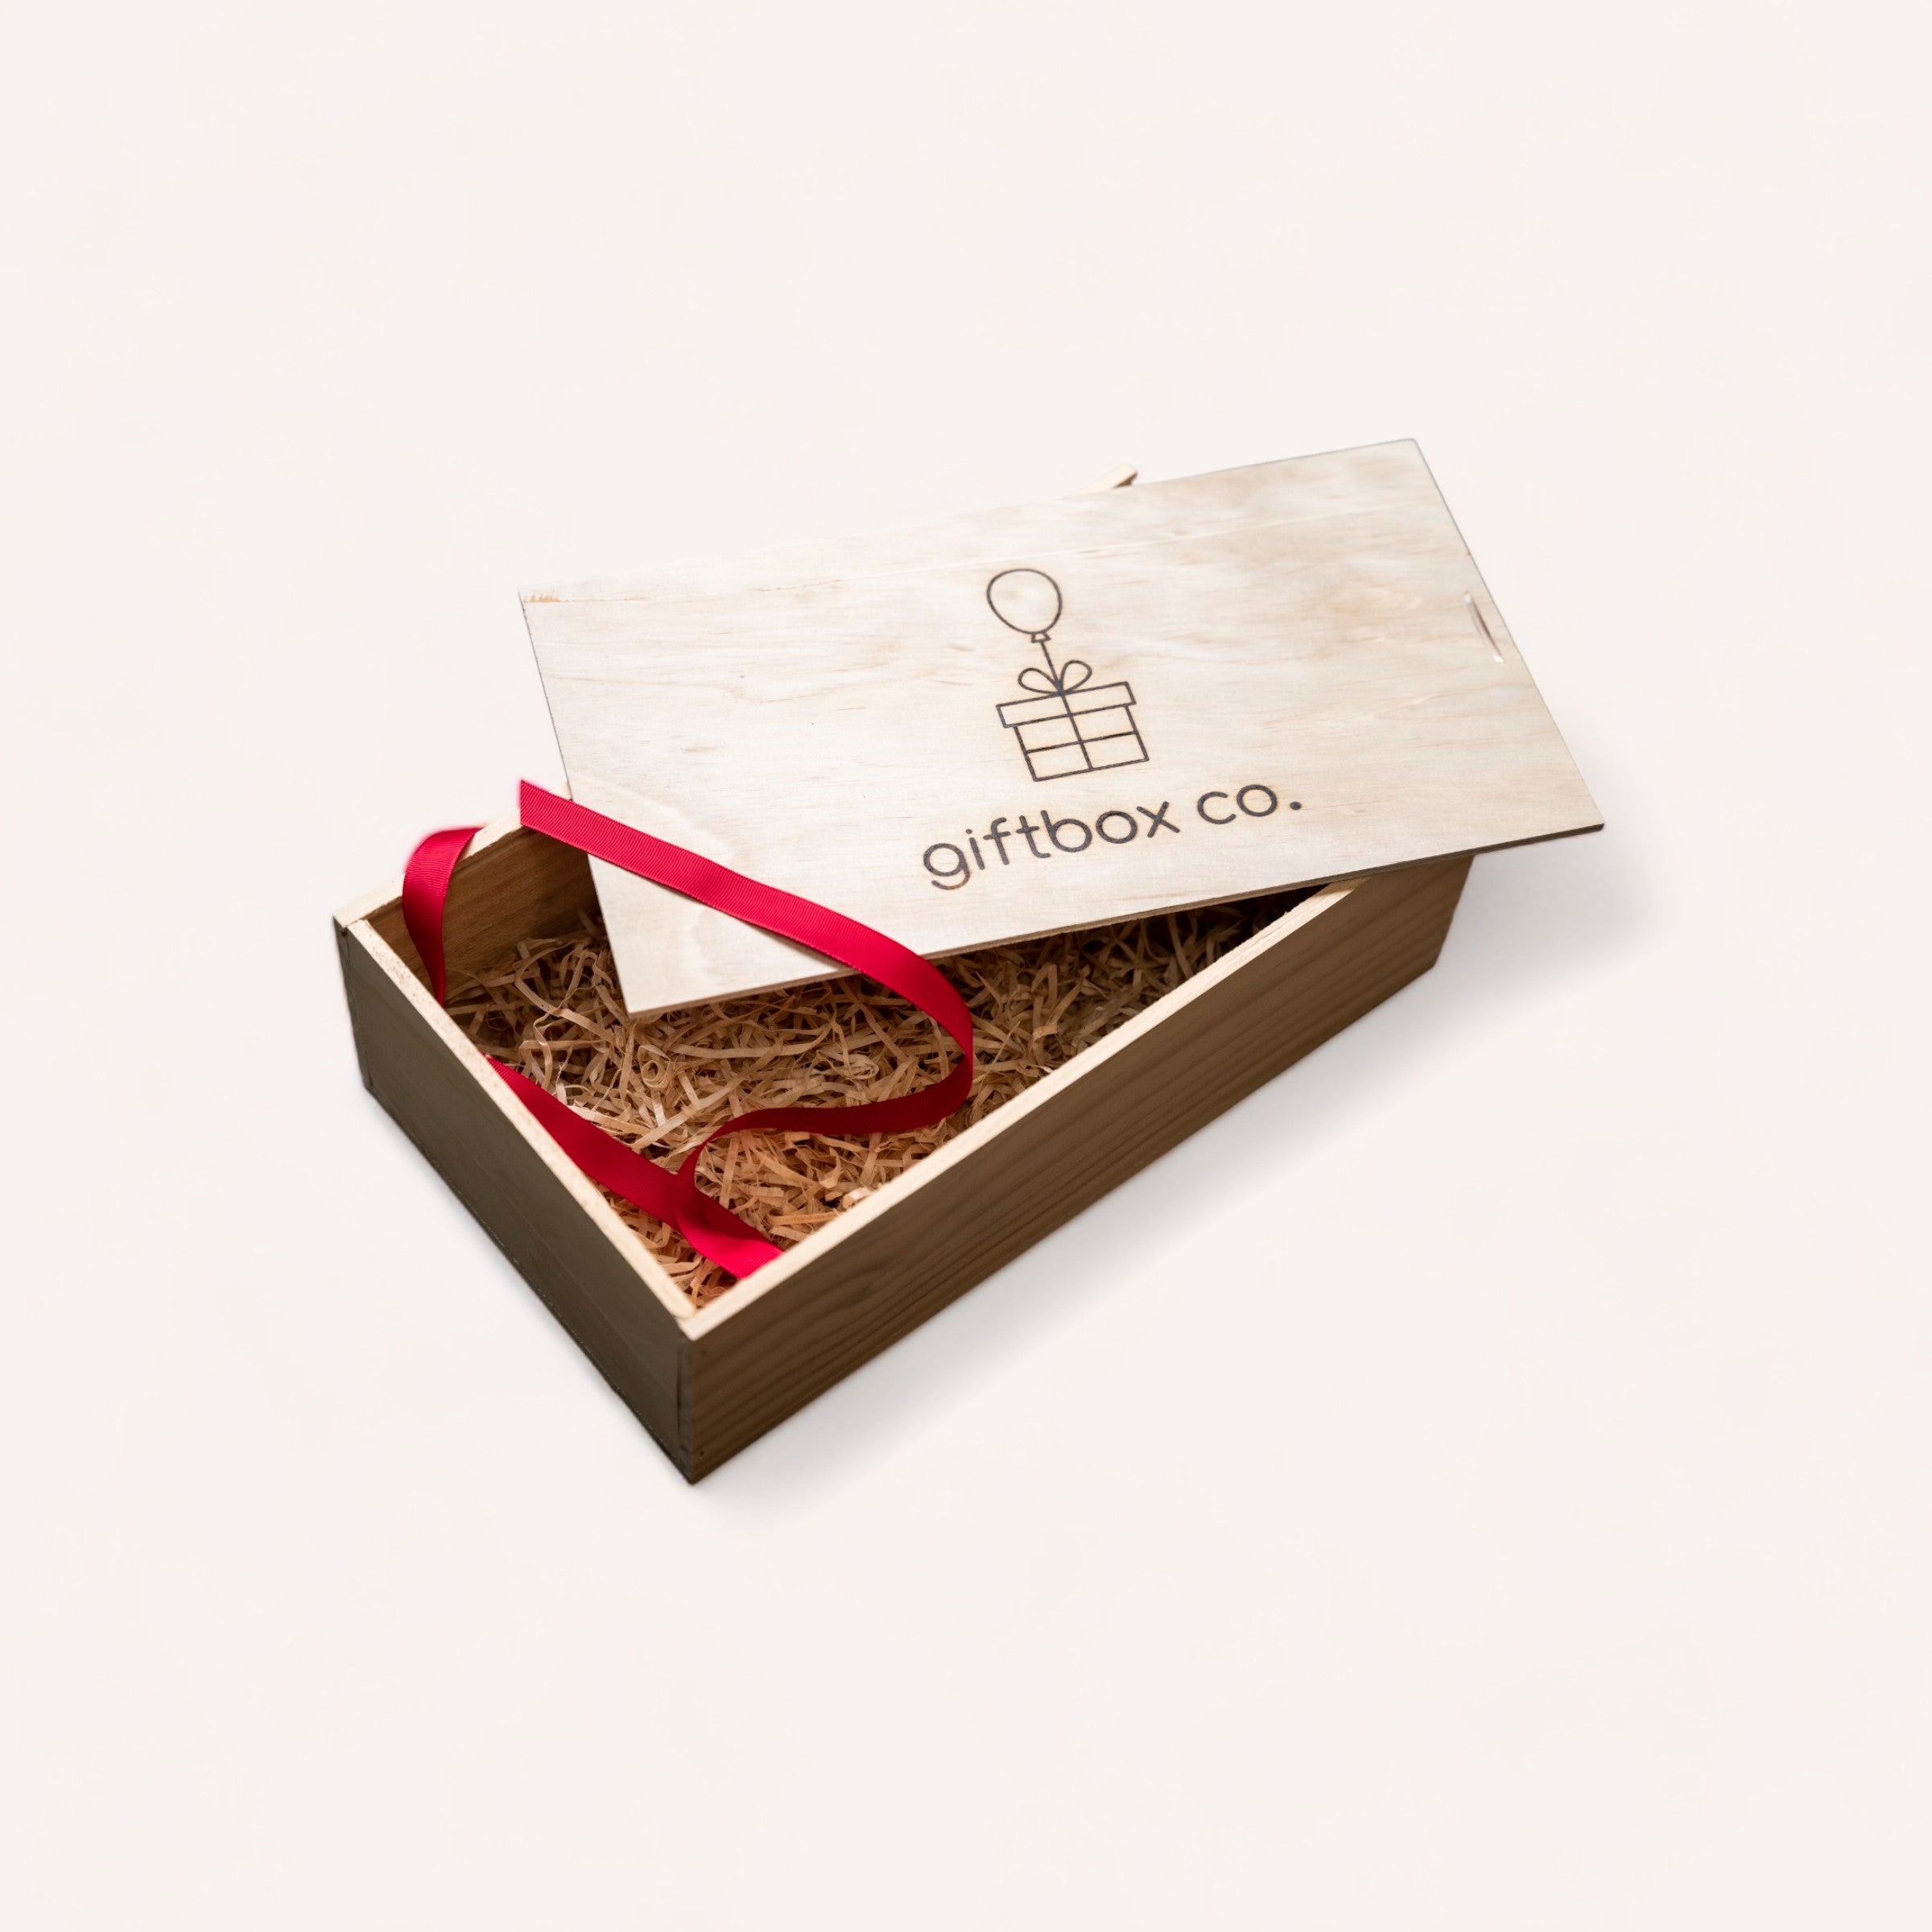 An elegant Build Your Own Giftbox from giftbox co. , with a sliding lid, adorned with a red ribbon, and containing protective straw filler, ready for a thoughtful present and a personalised gift.